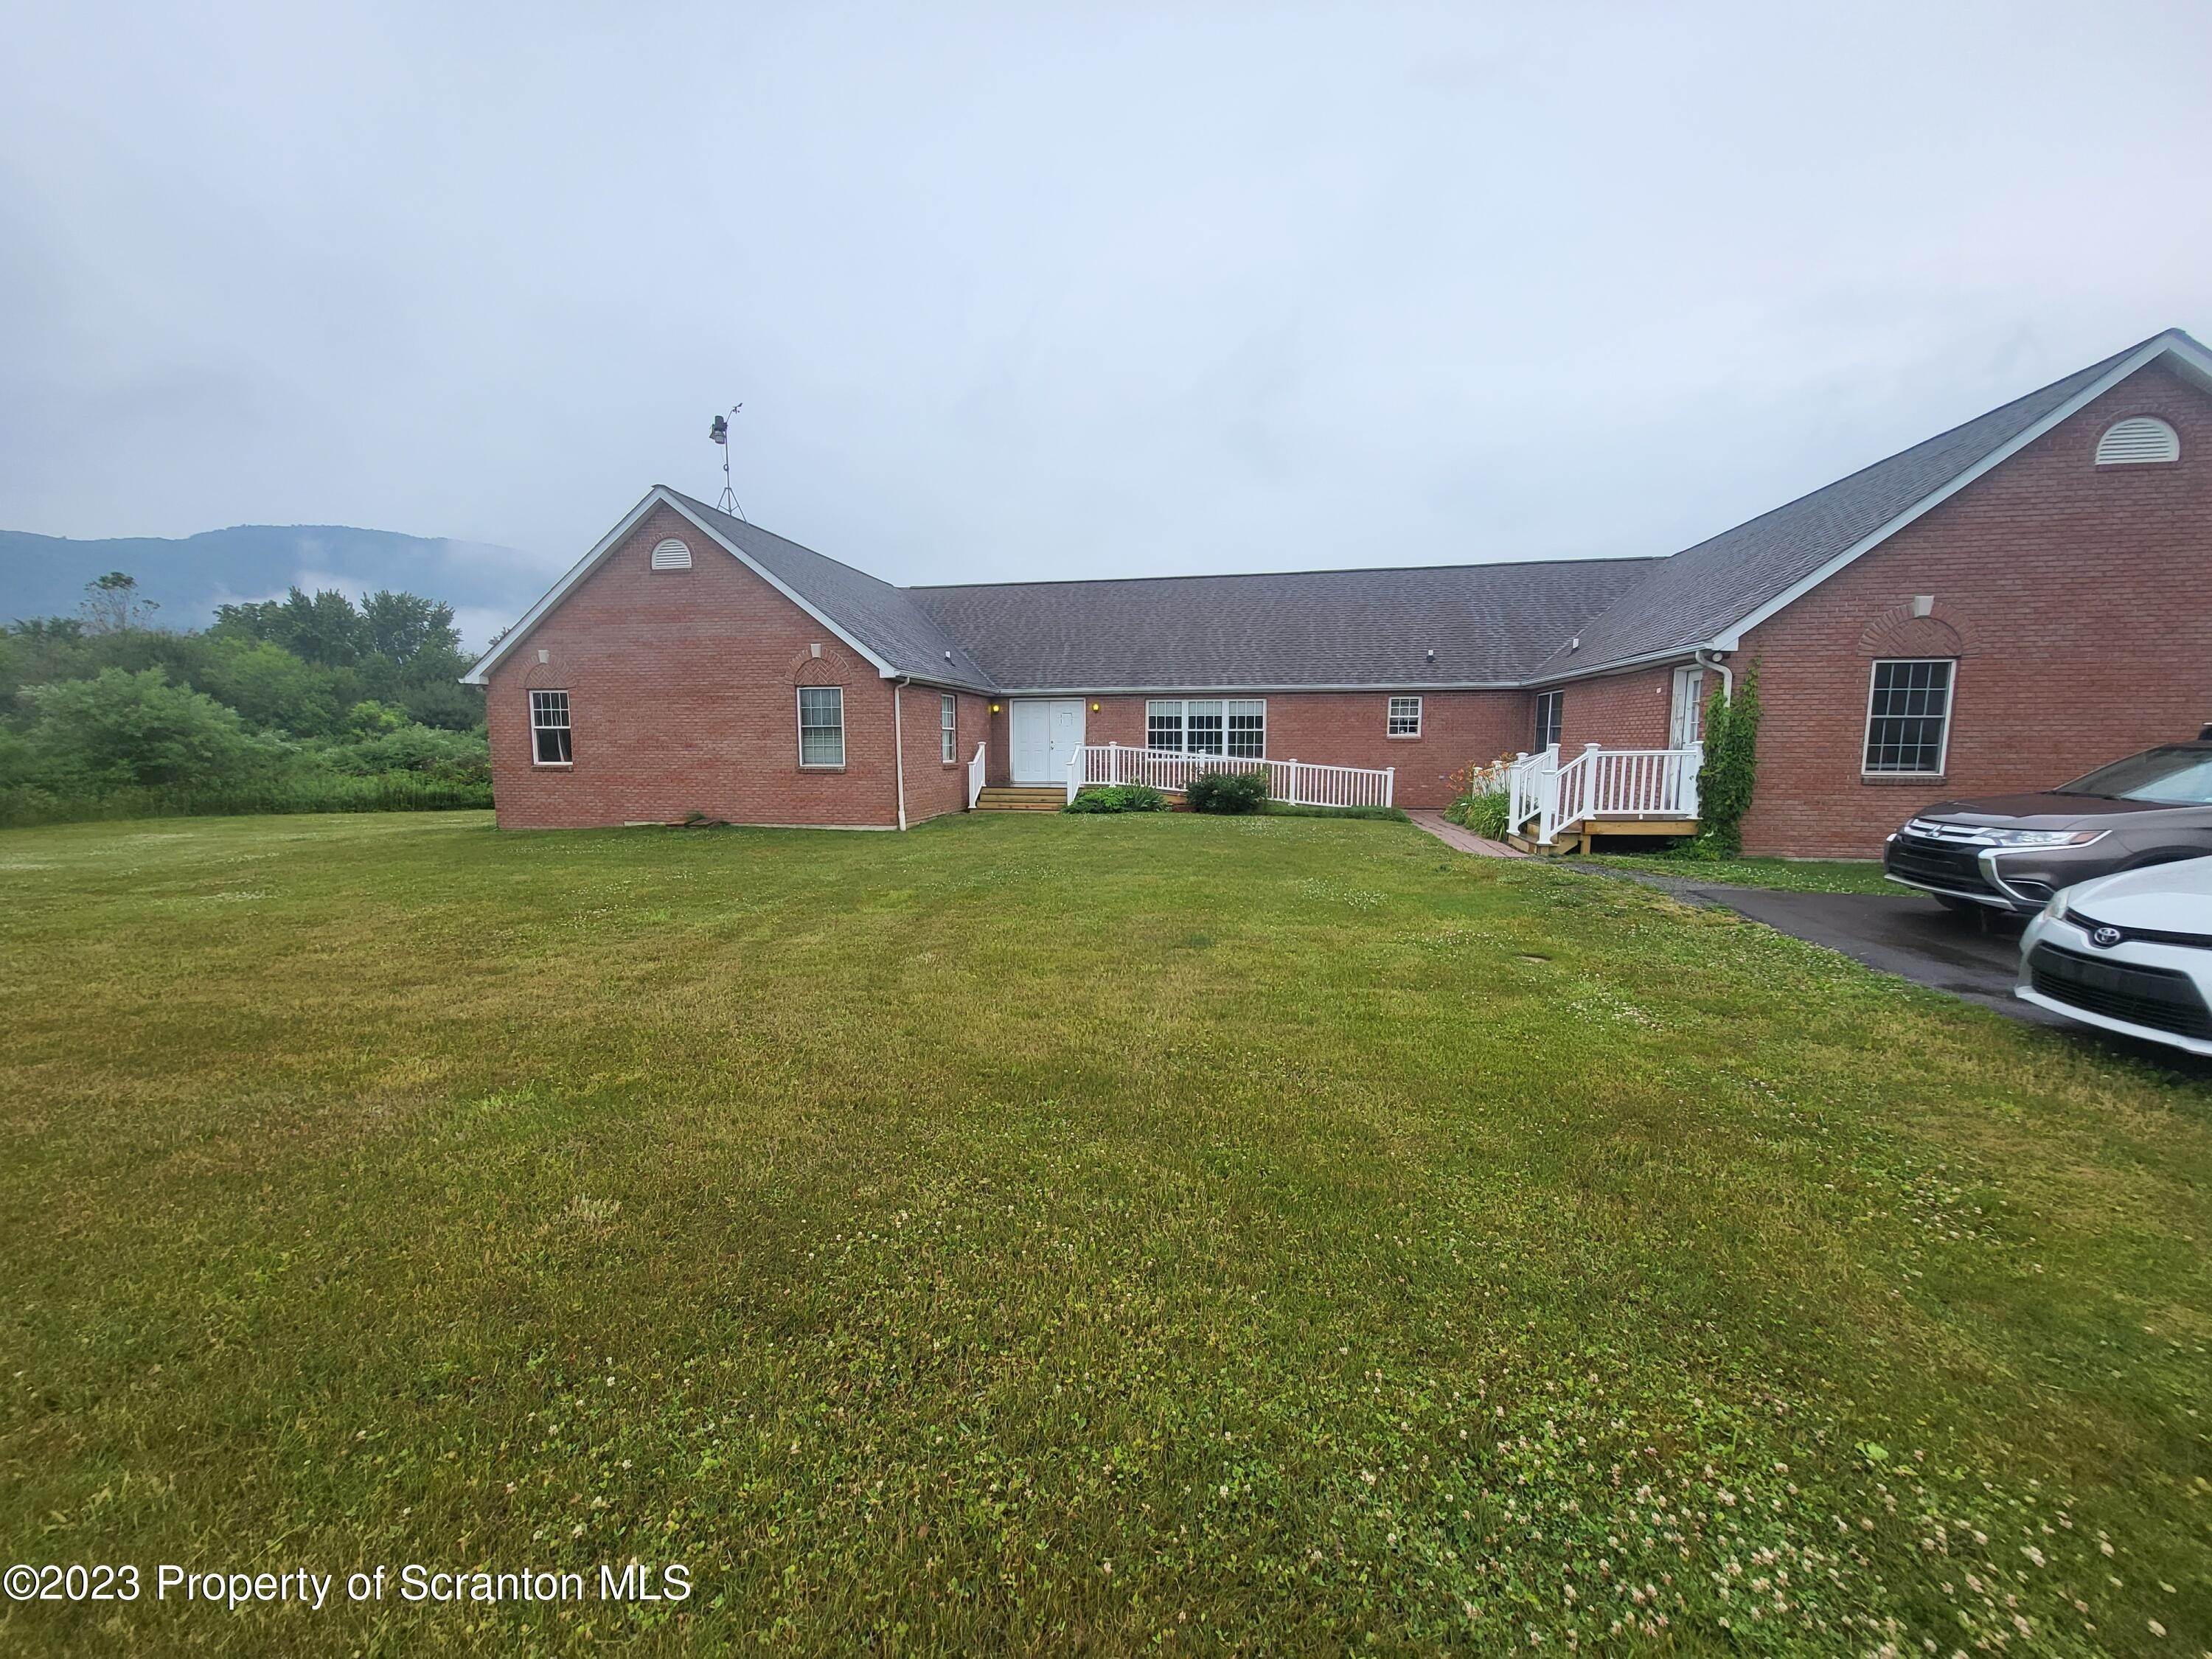 Property for Sale at 219 Wellwood Dr Tunkhannock, Pennsylvania 18657 United States